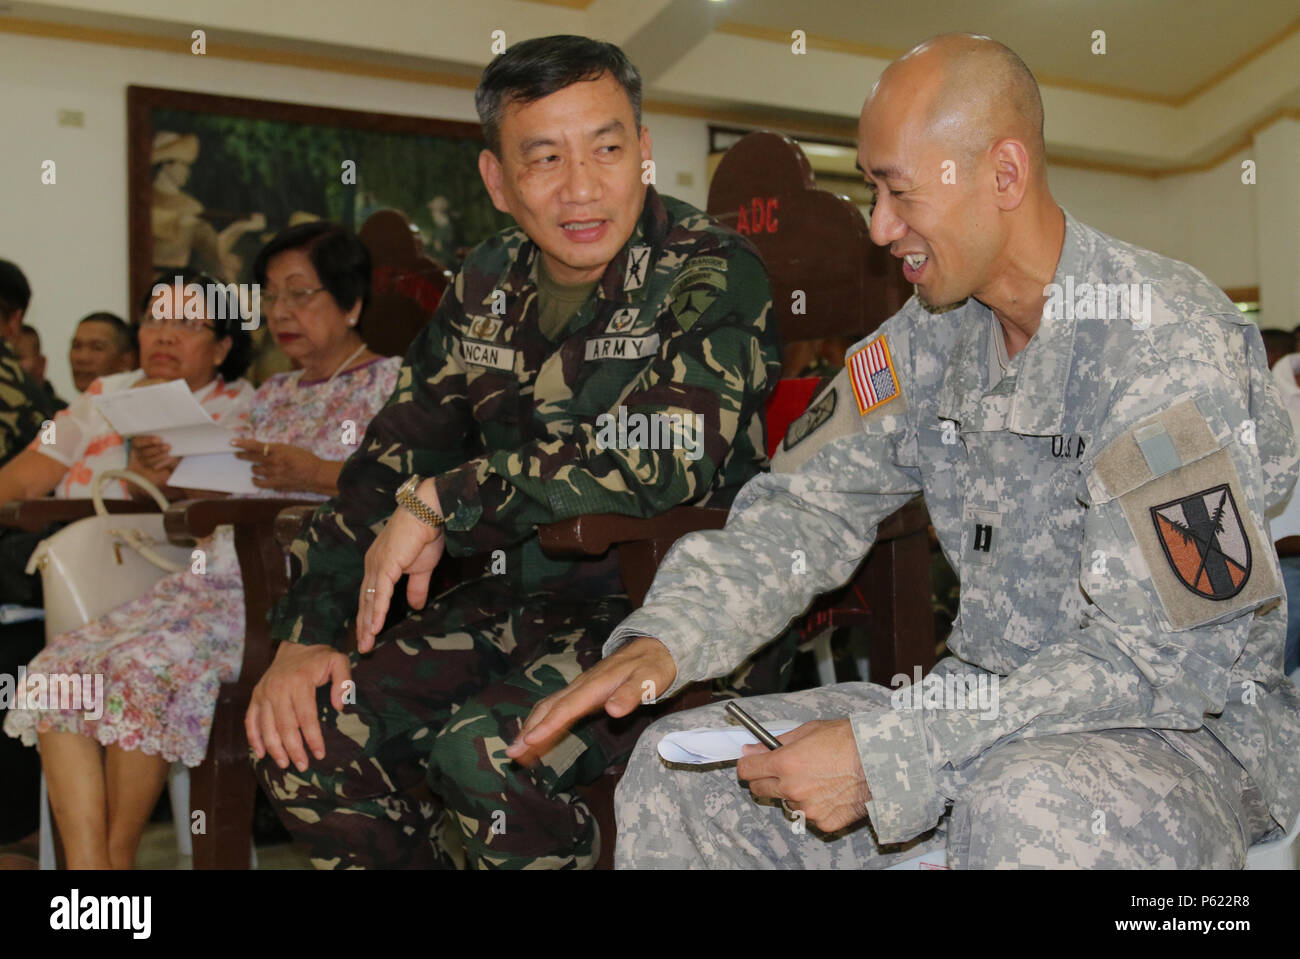 Brig. Gen. Dinoh A. Dolina, Armed Forces of the Philippines (AFP) assistant division commander, 3rd Infantry Division (left), and U.S. Army Reserve Cpt. Kevin K. Tran, 303rd Maneuver Enhancement Brigade, operations officer in charge in support of Balikatan 2016 Combined Joint Civil Military Operations Task Force, exchange military knowledge at Camp Peralta, Capiz, Philippines, while waiting to view a video memoir of the historical Bataan Death March of 1942, April 09, 2016. The viewing followed a flag raising ceremony. The ceremony was one of many that have brought together the AFP and U.S. mi Stock Photo